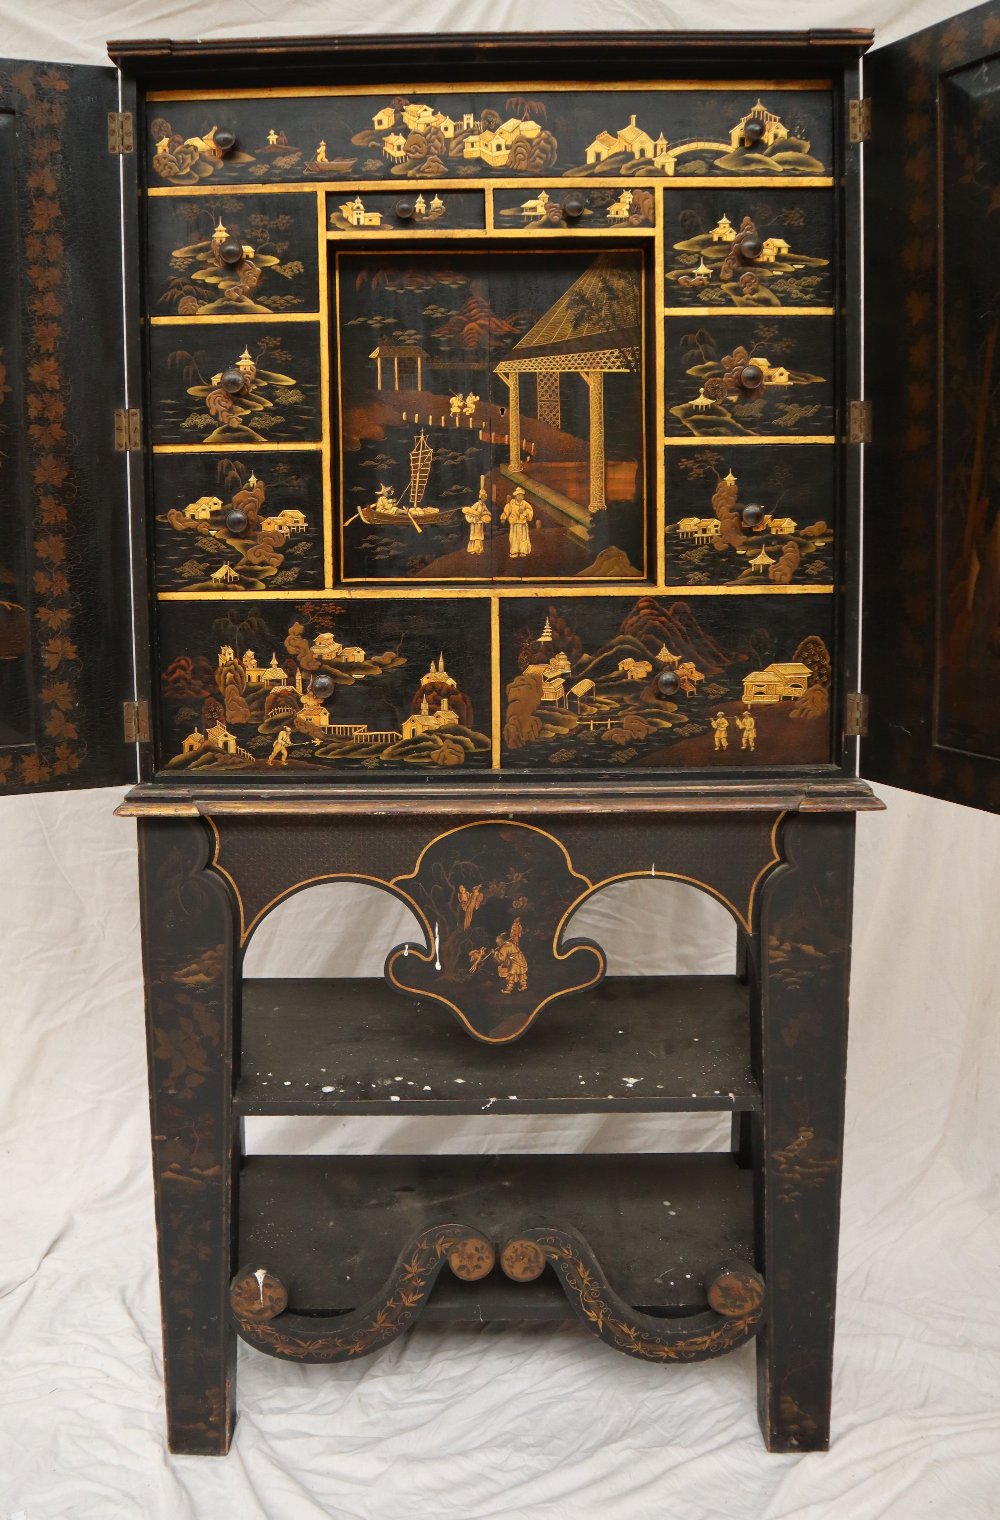 A 19th century Japanned cabinet on stand with Chinoiserie decoration of dignitaries in a landscape, - Image 5 of 12